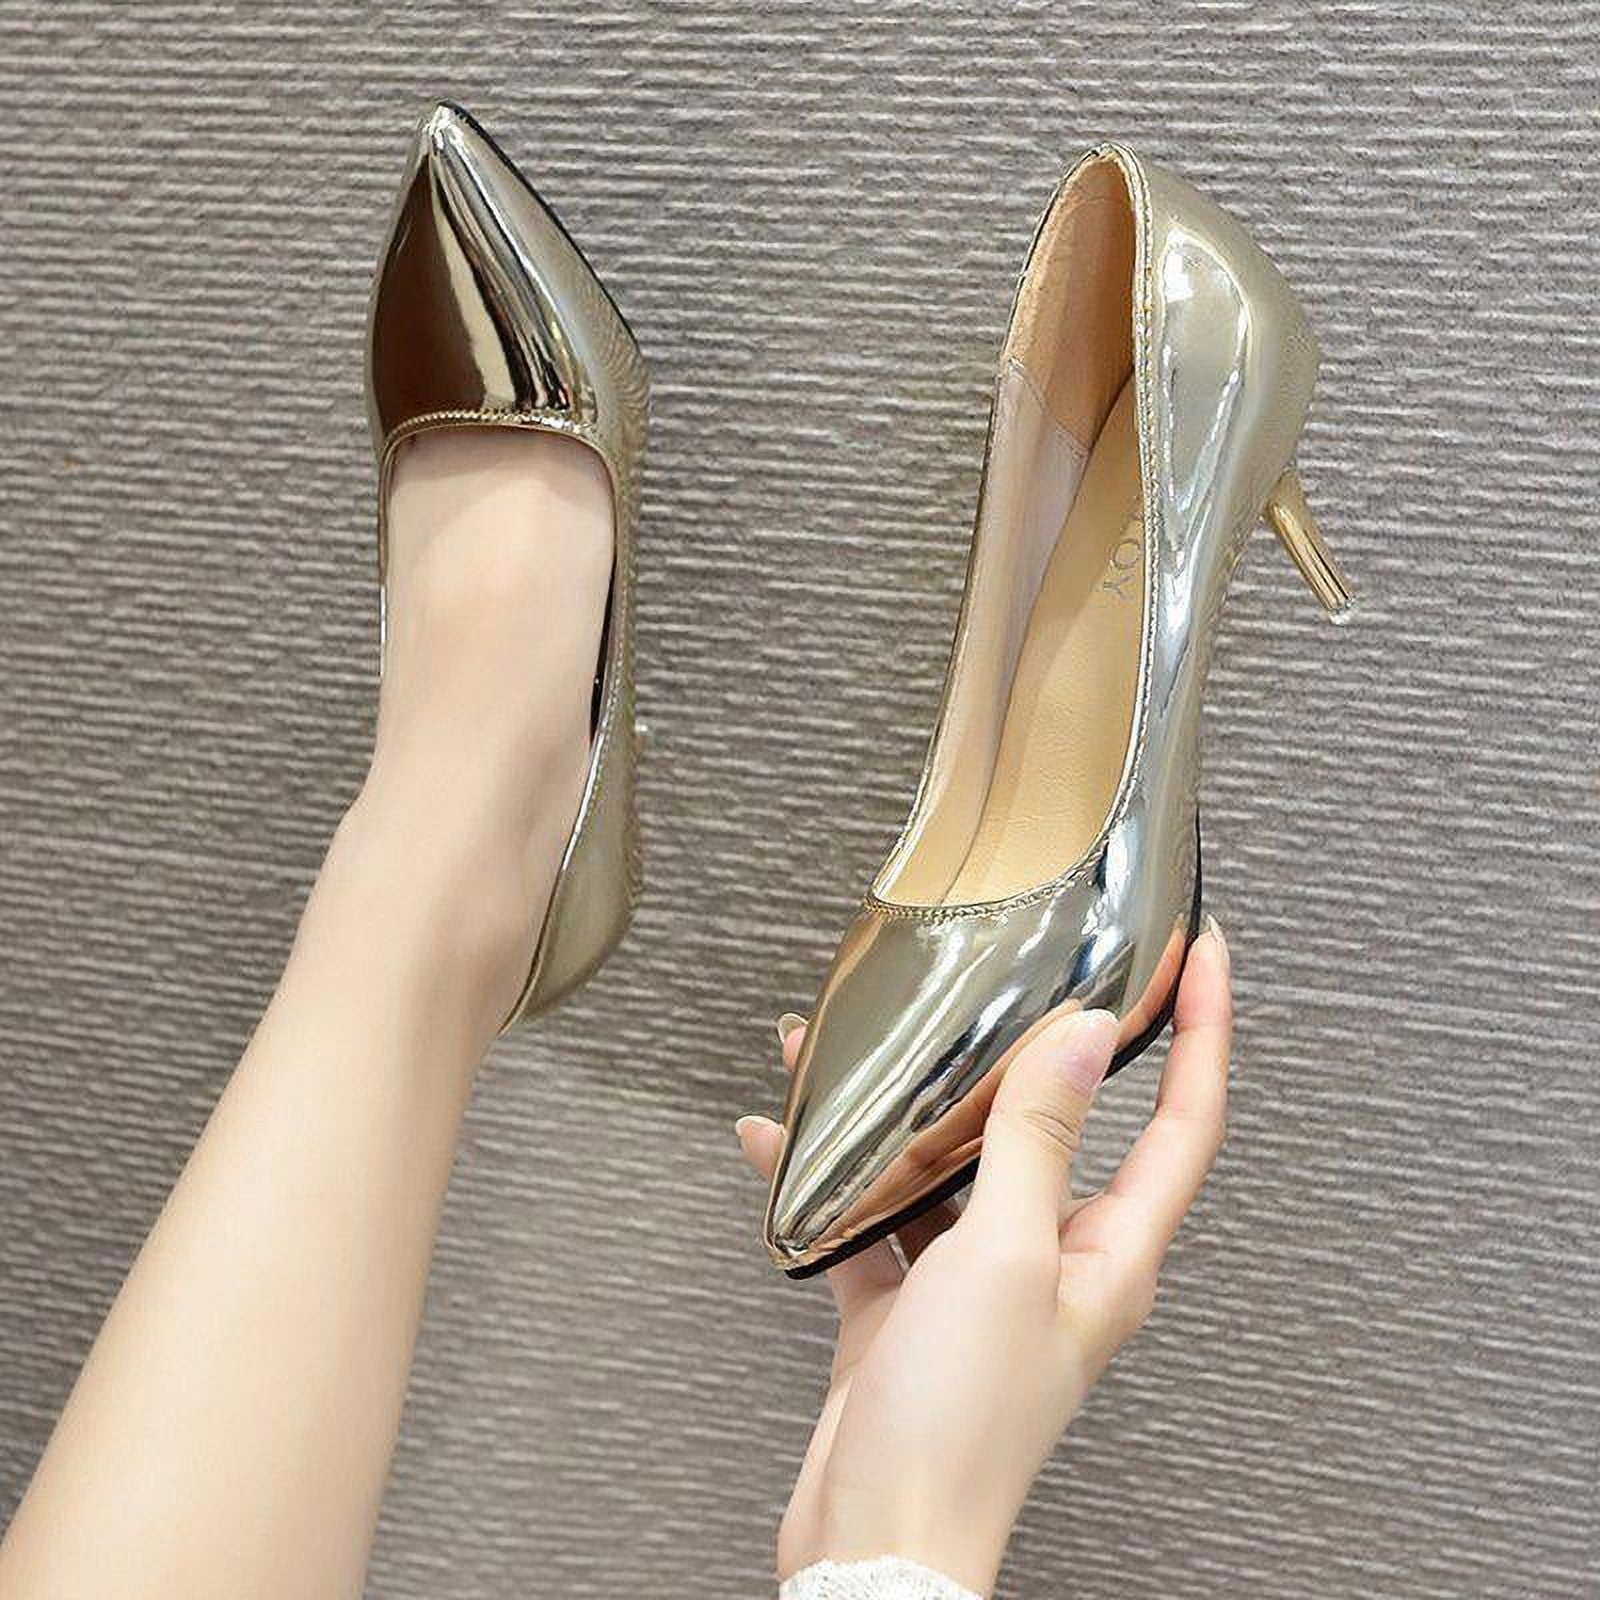 2023 New Summer Shoes Women Fashion Gold Silver Catwalk Sandals Pointed Toe  Stilettos Heels Party Shoes Sexy Big Size 40 41 - AliExpress